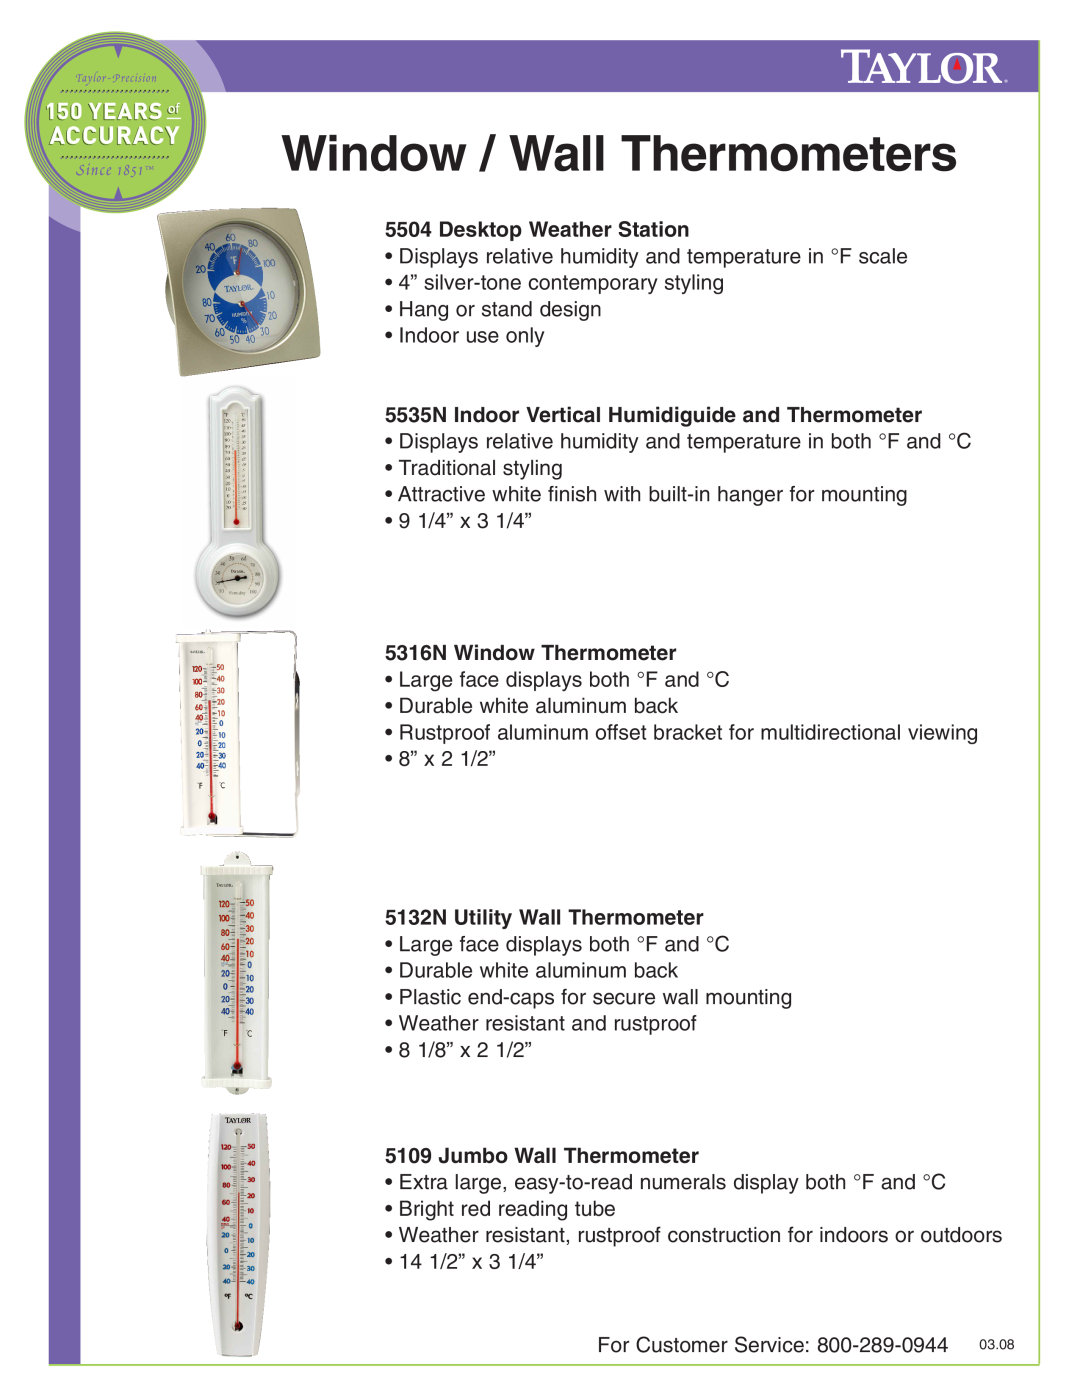 Taylor 5504 manual Window / Wall Thermometers, Desktop Weather Station, 5535N Indoor Vertical Humidiguide and Thermometer 